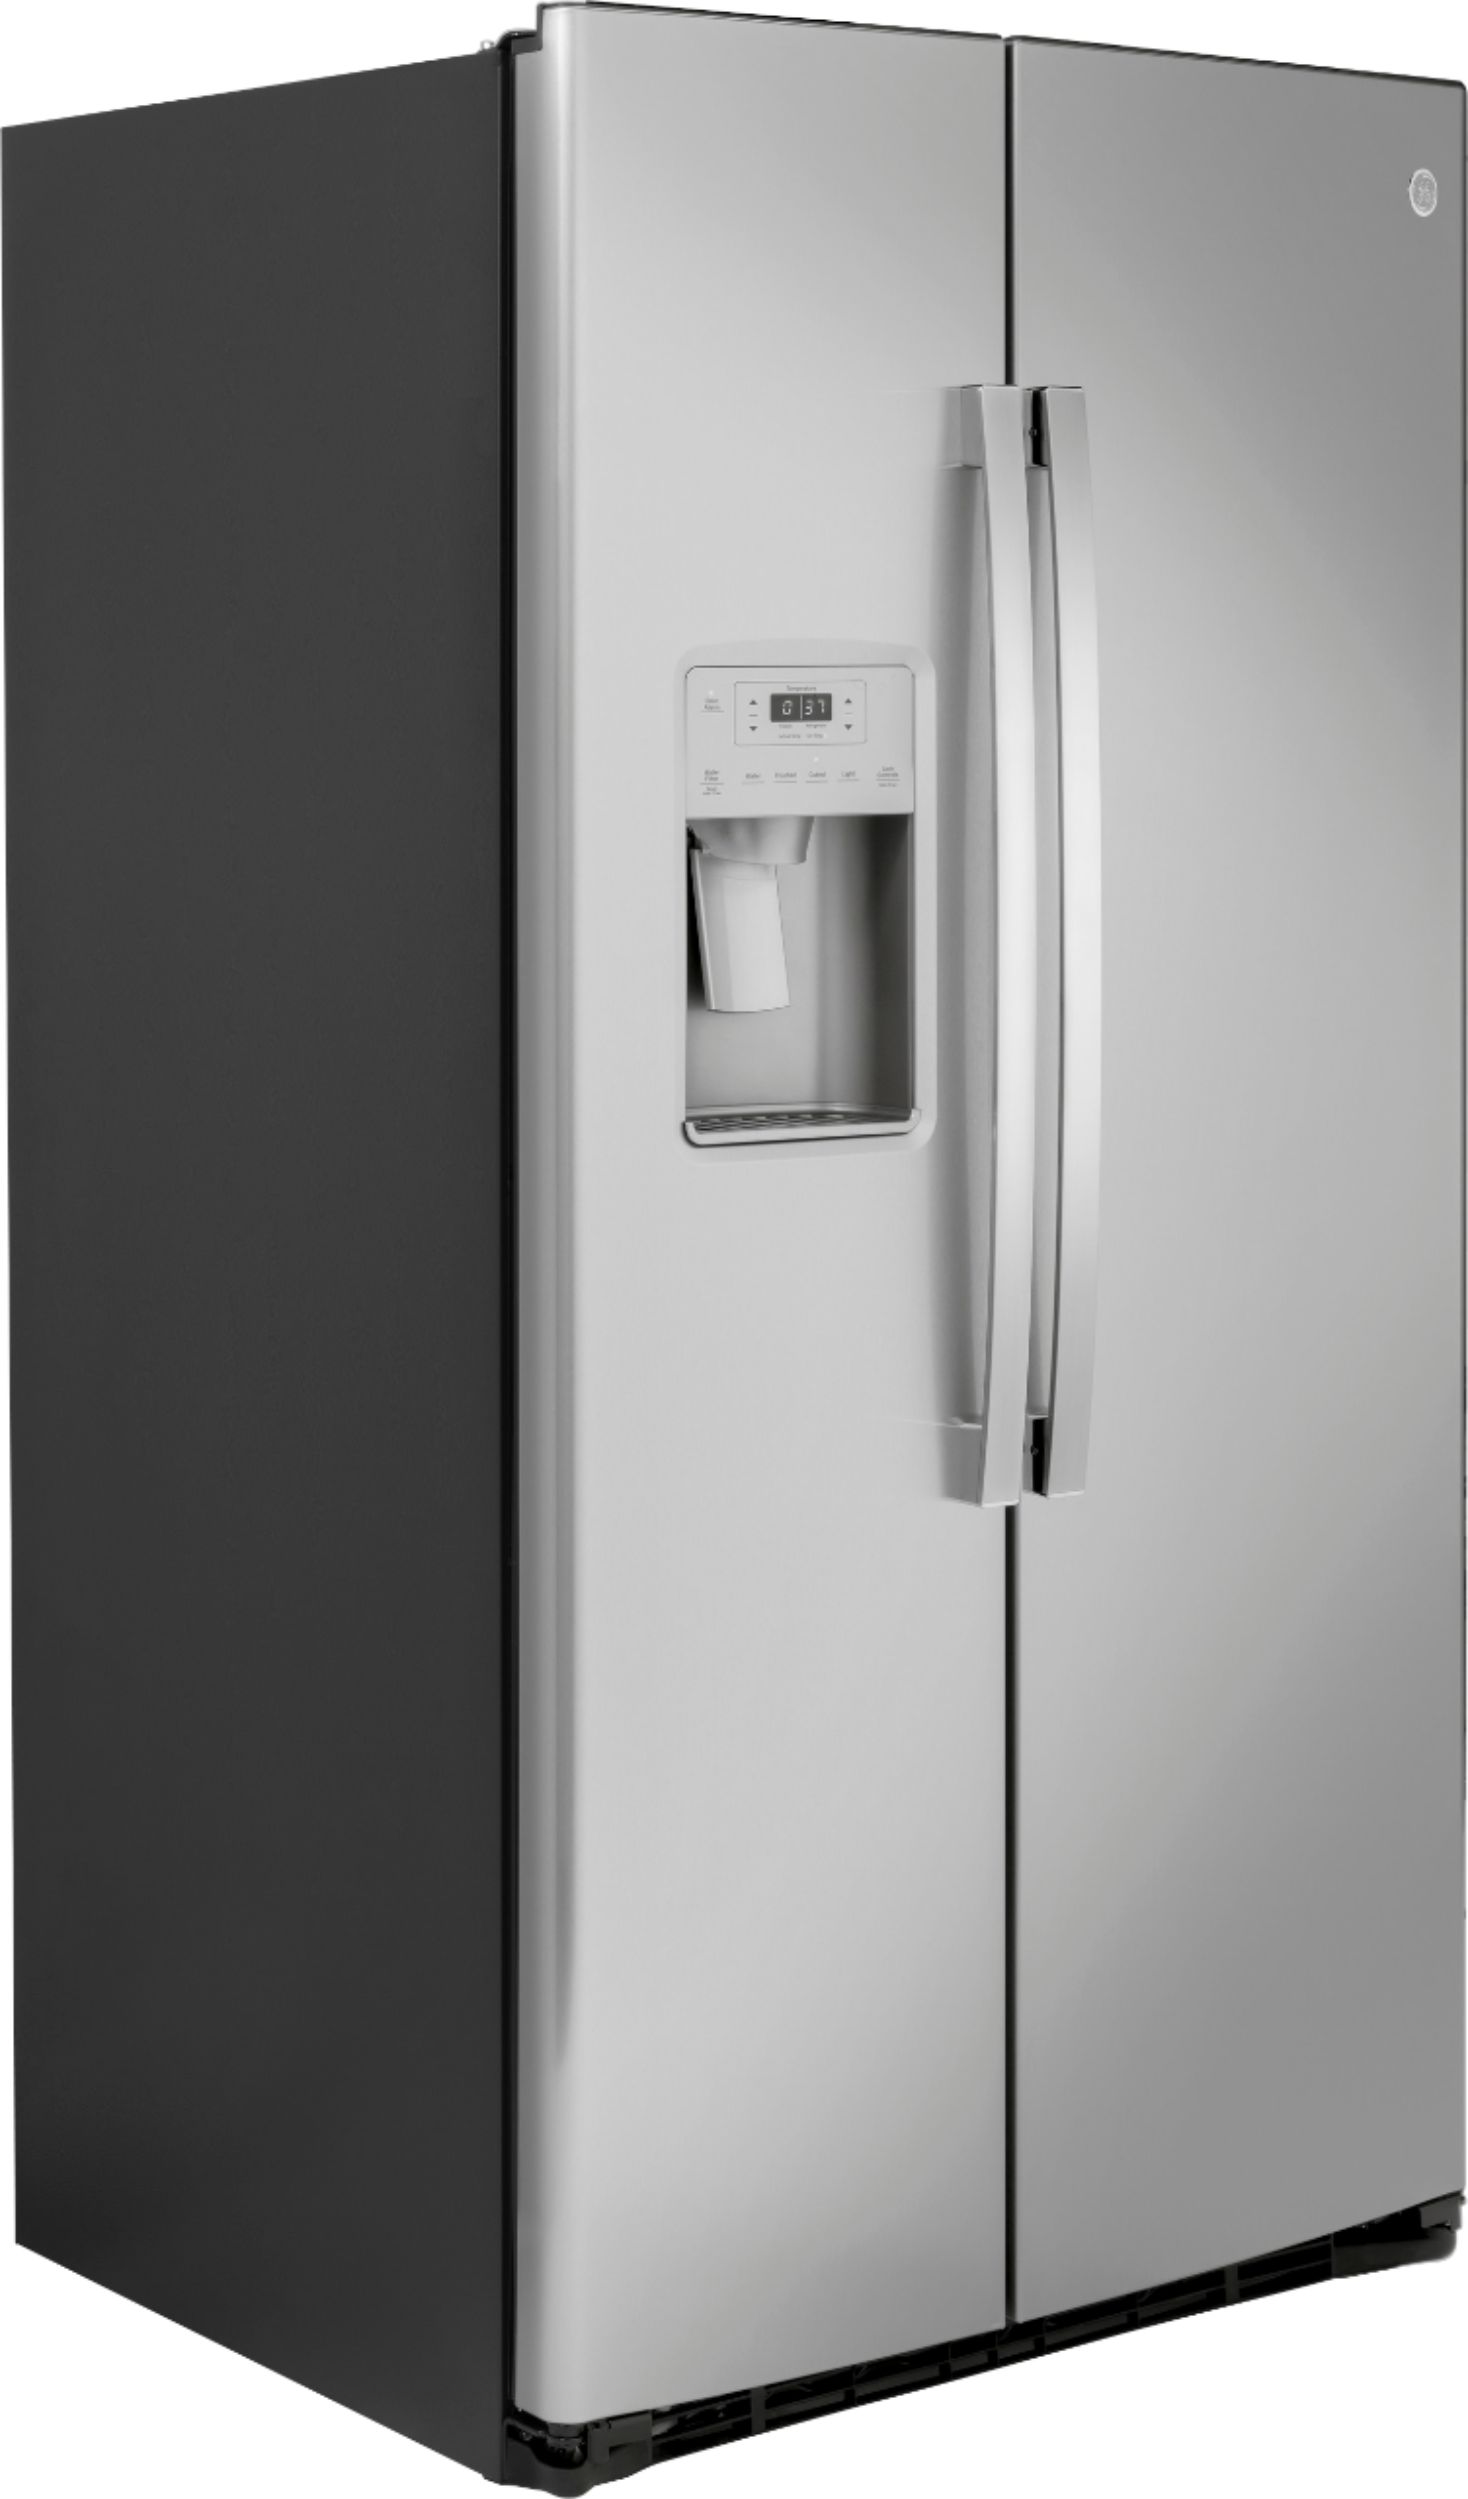 GE 25.1 Cu. Ft. Side-By-Side Refrigerator with External Ice & Water ...